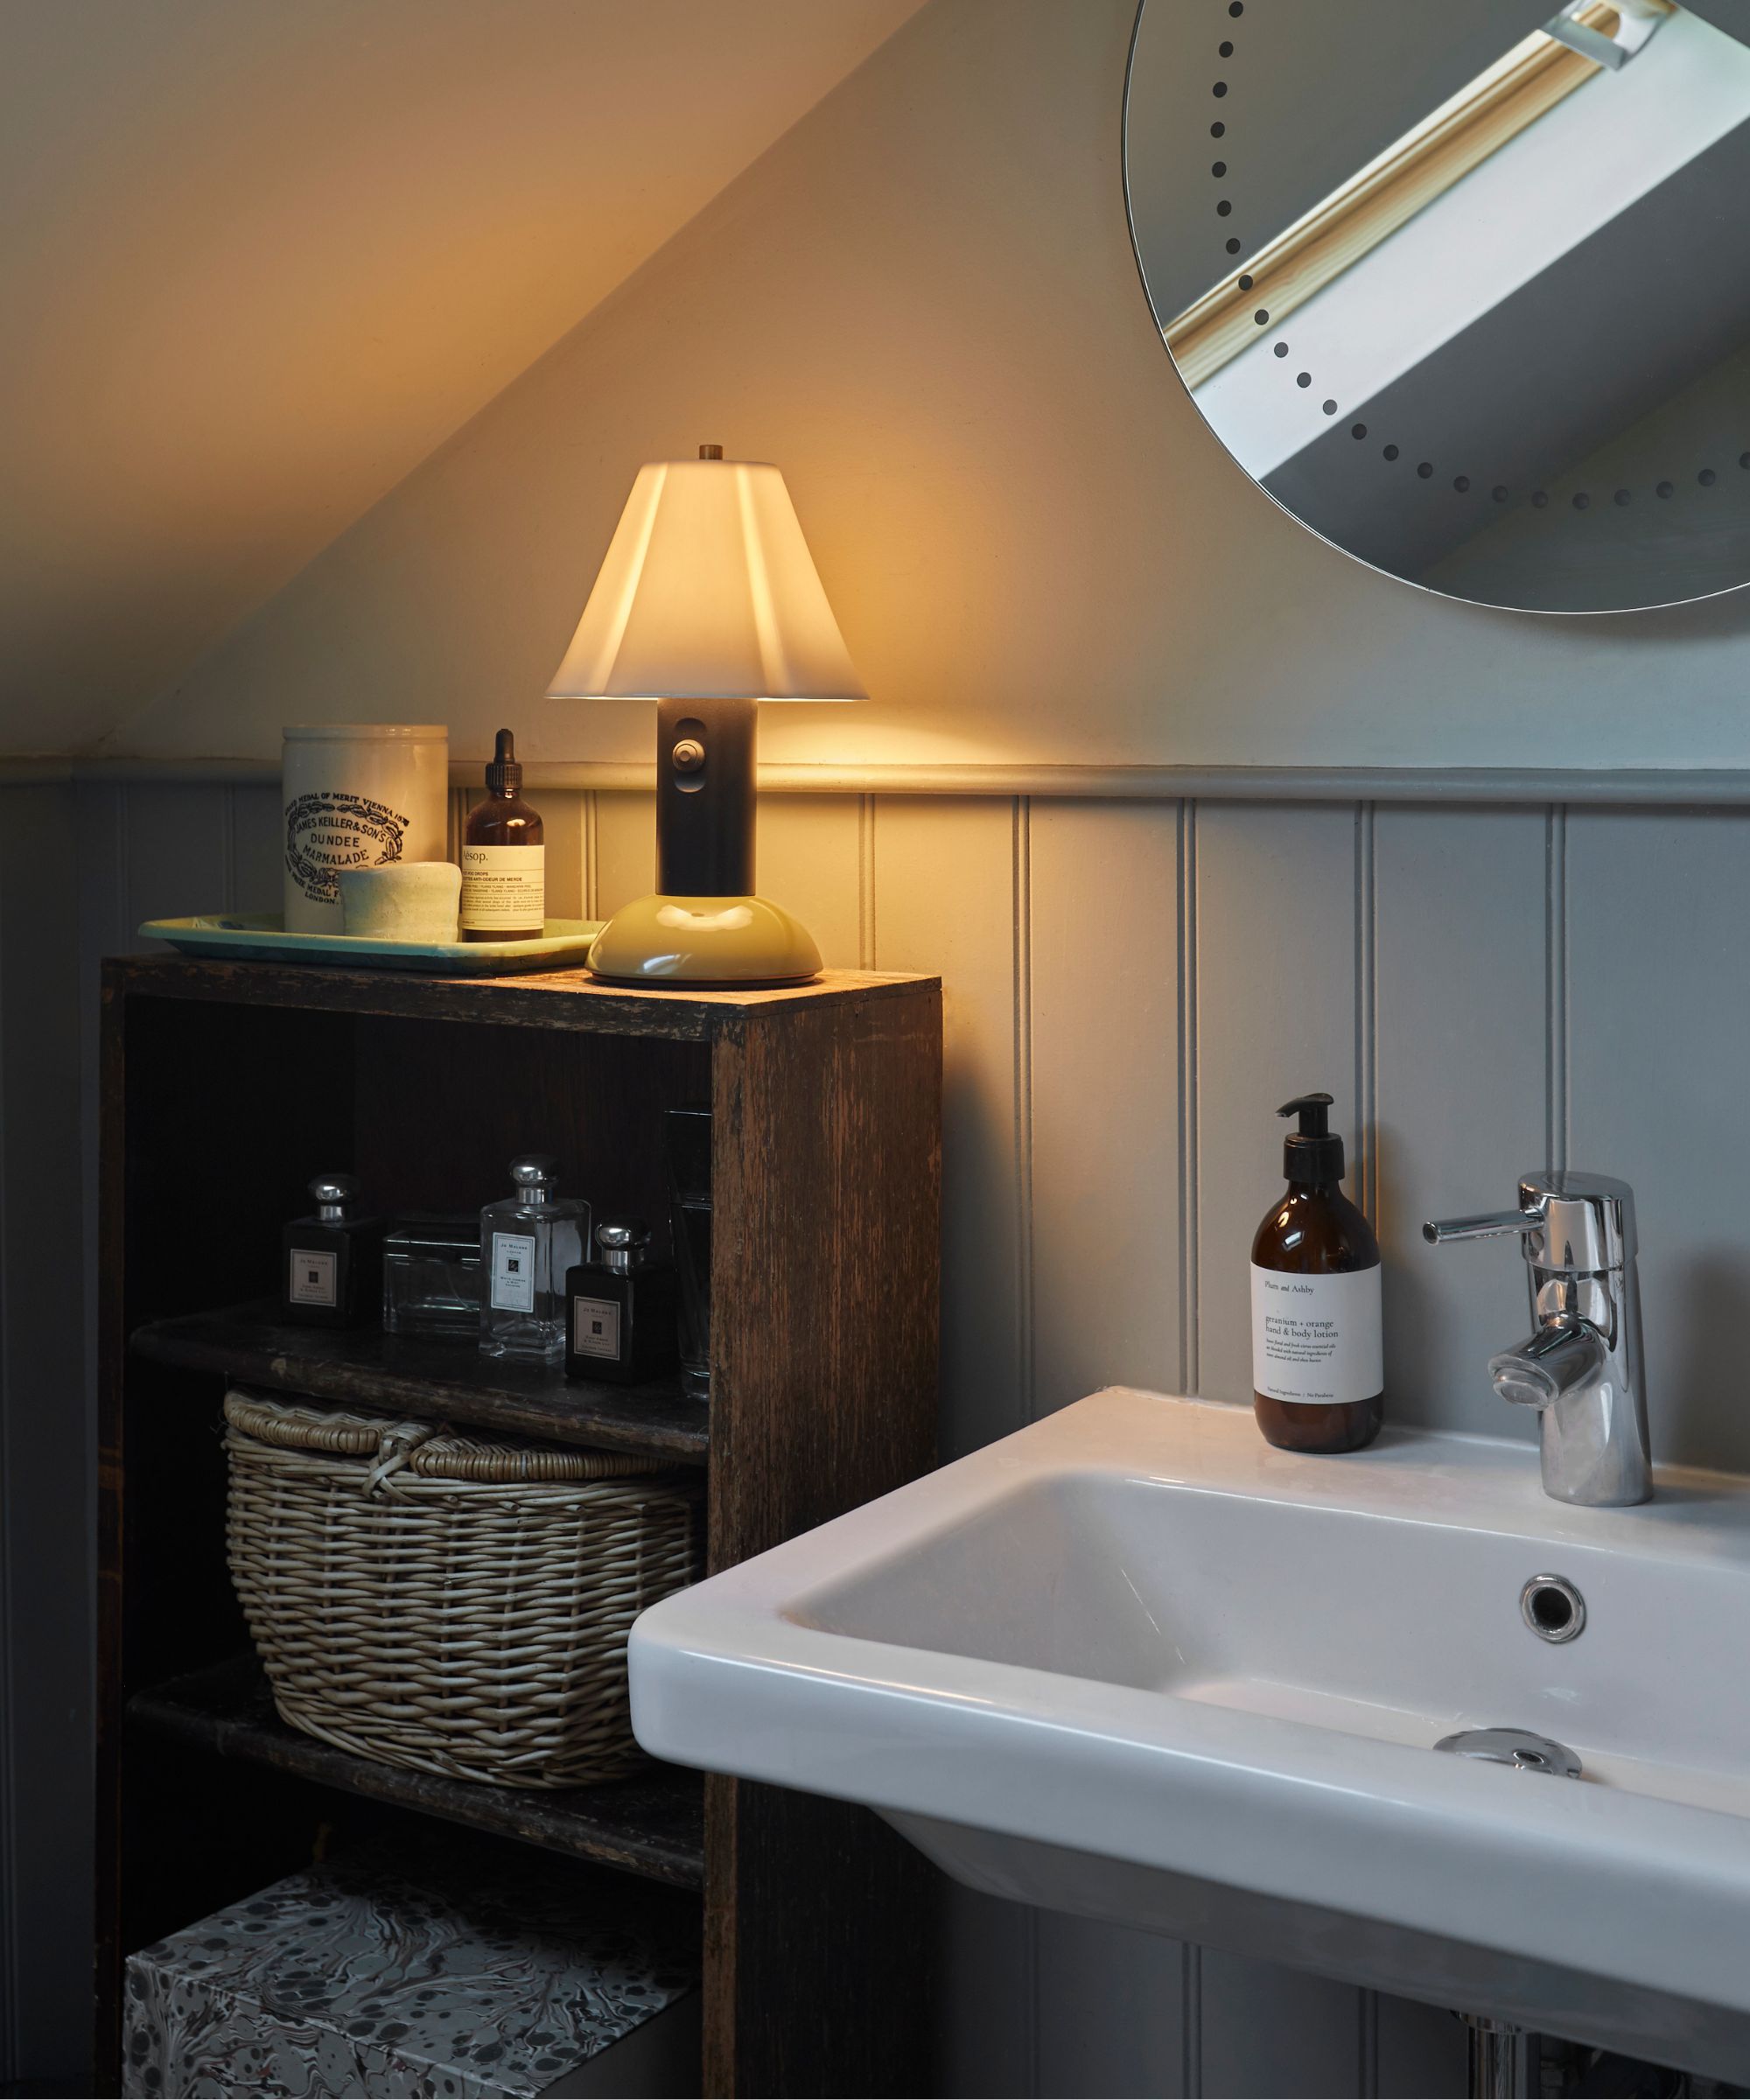 modern bathroom with antique storage and a lamp